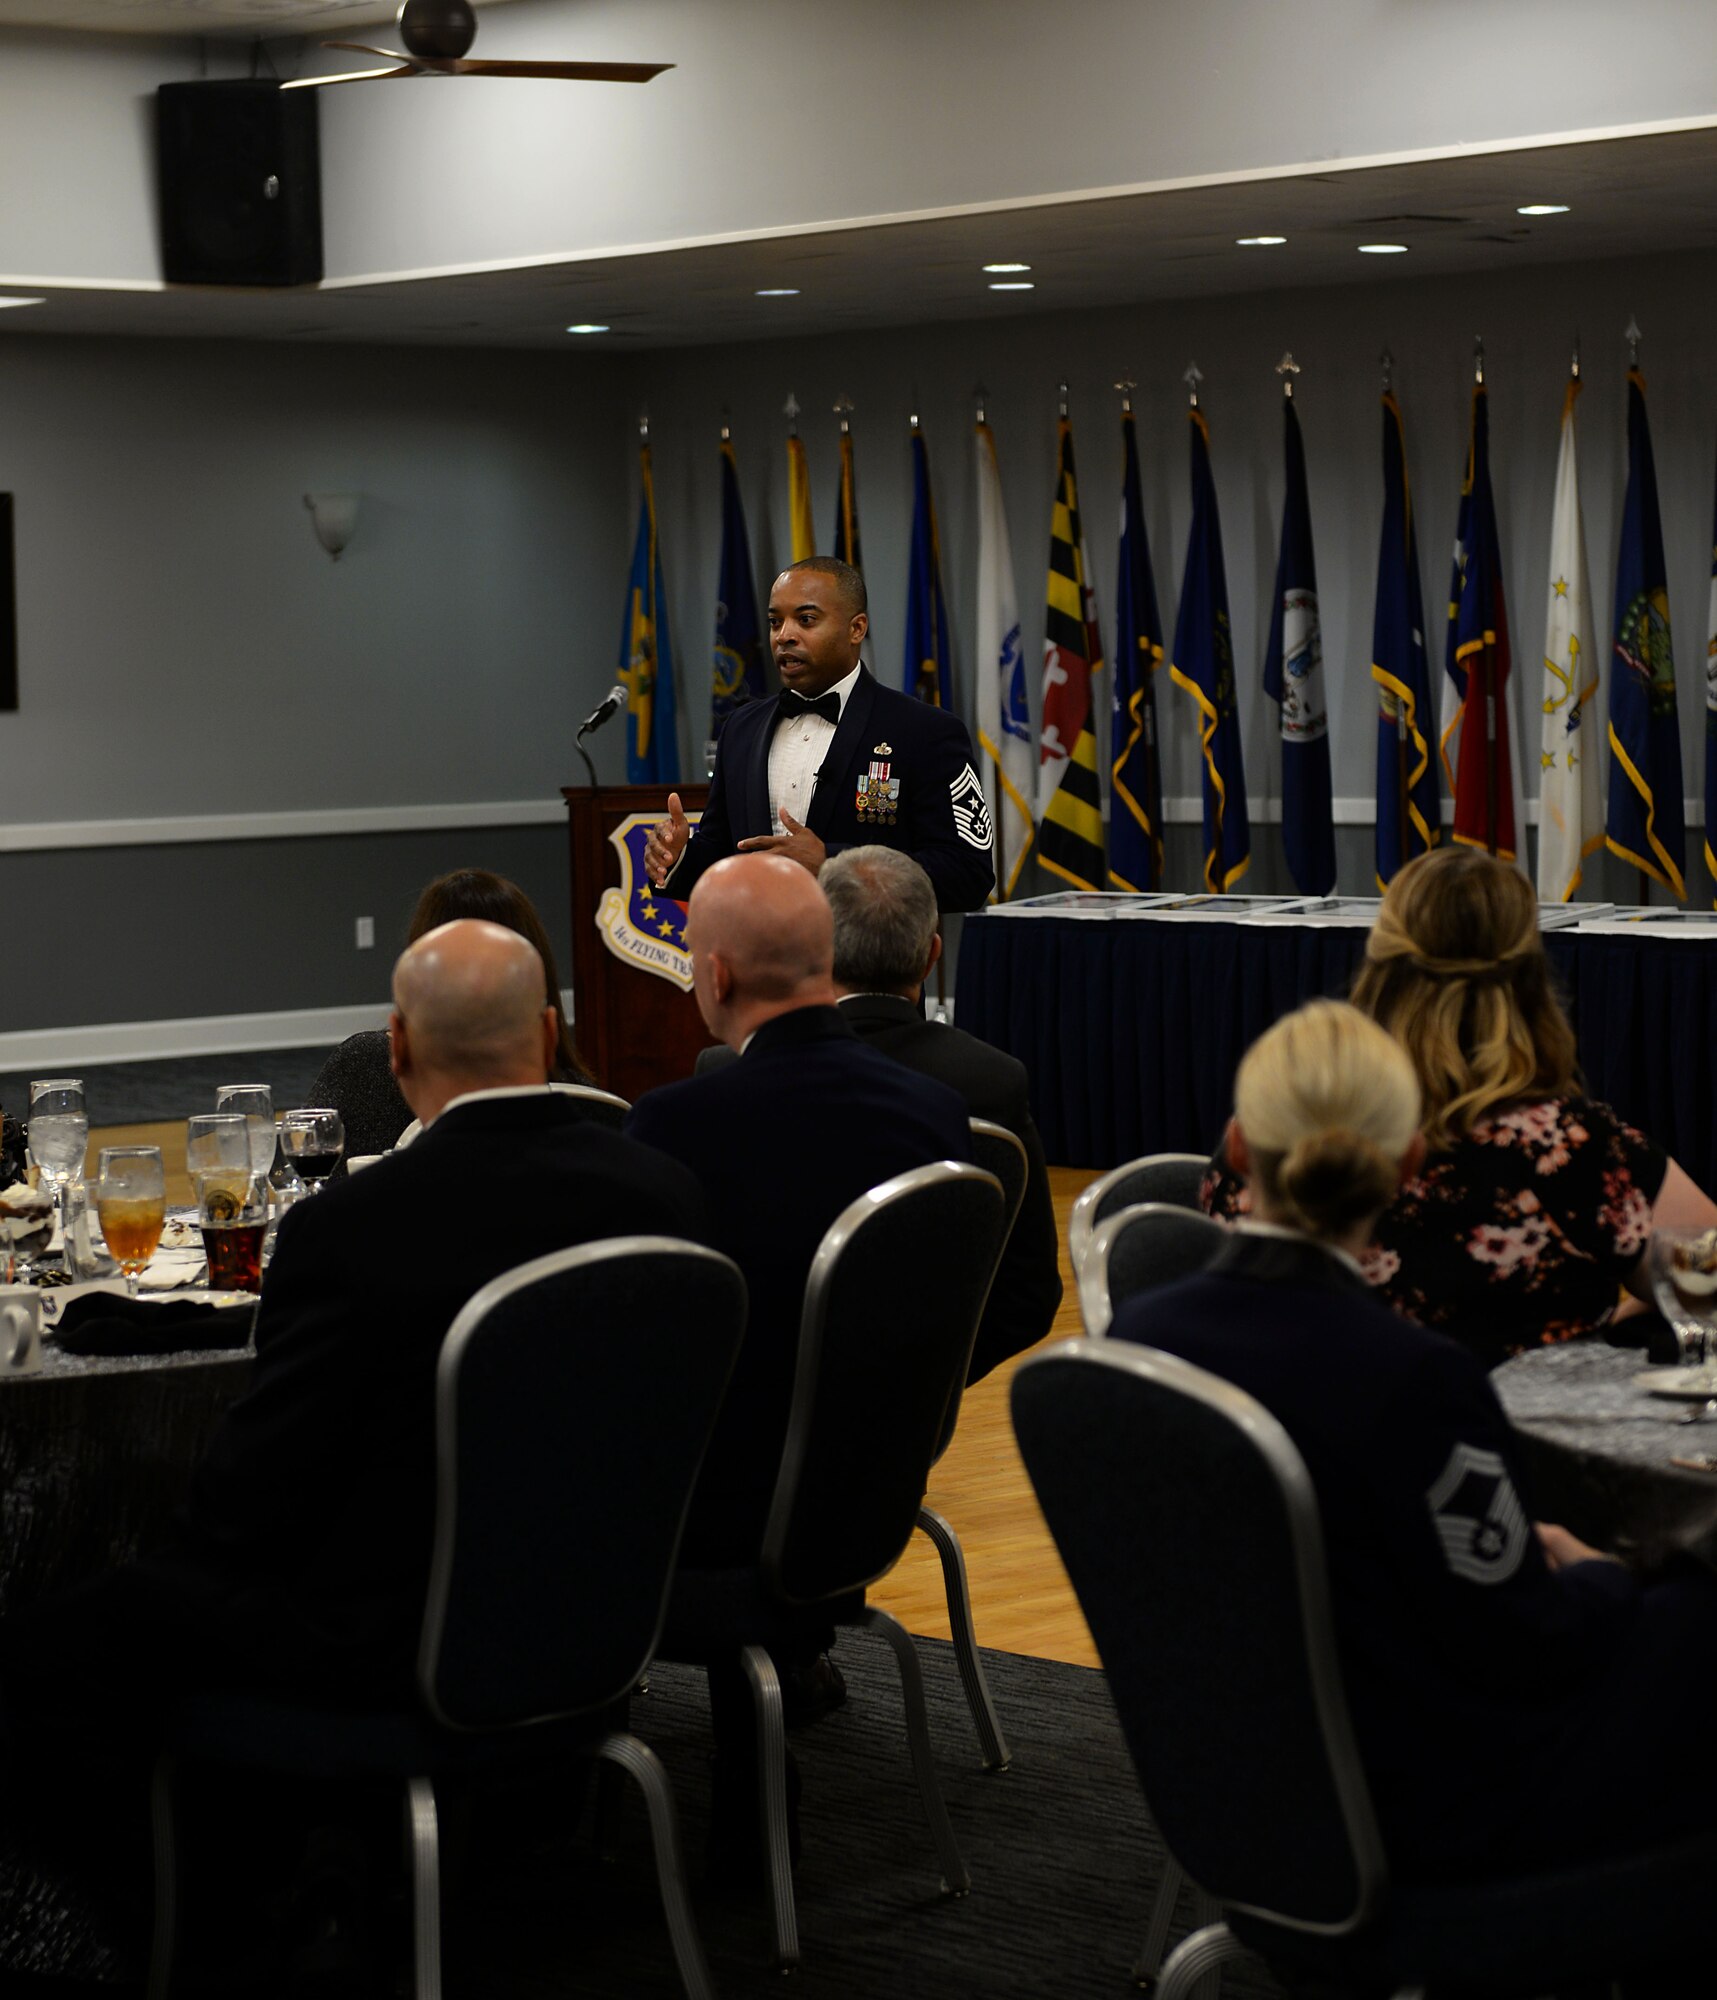 Chief Master Sgt. Jermaine Evans, Jeanne M. Holm Center for Officer Accessions and Citizen Deployment command chief master sergeant, from Maxwell Air Force Base, Ala., speaks to attendees during a Senior NCO Induction Ceremony Sept. 9, 2019, at the Club on Columbus AFB, Miss. Evans highlighted a book by John Maxwell titled “The 5 Levels of Leadership” and discussed the different levels for the inductees to become better leaders.   (U.S. Air Force photo by Airman 1st Class Hannah Bean)